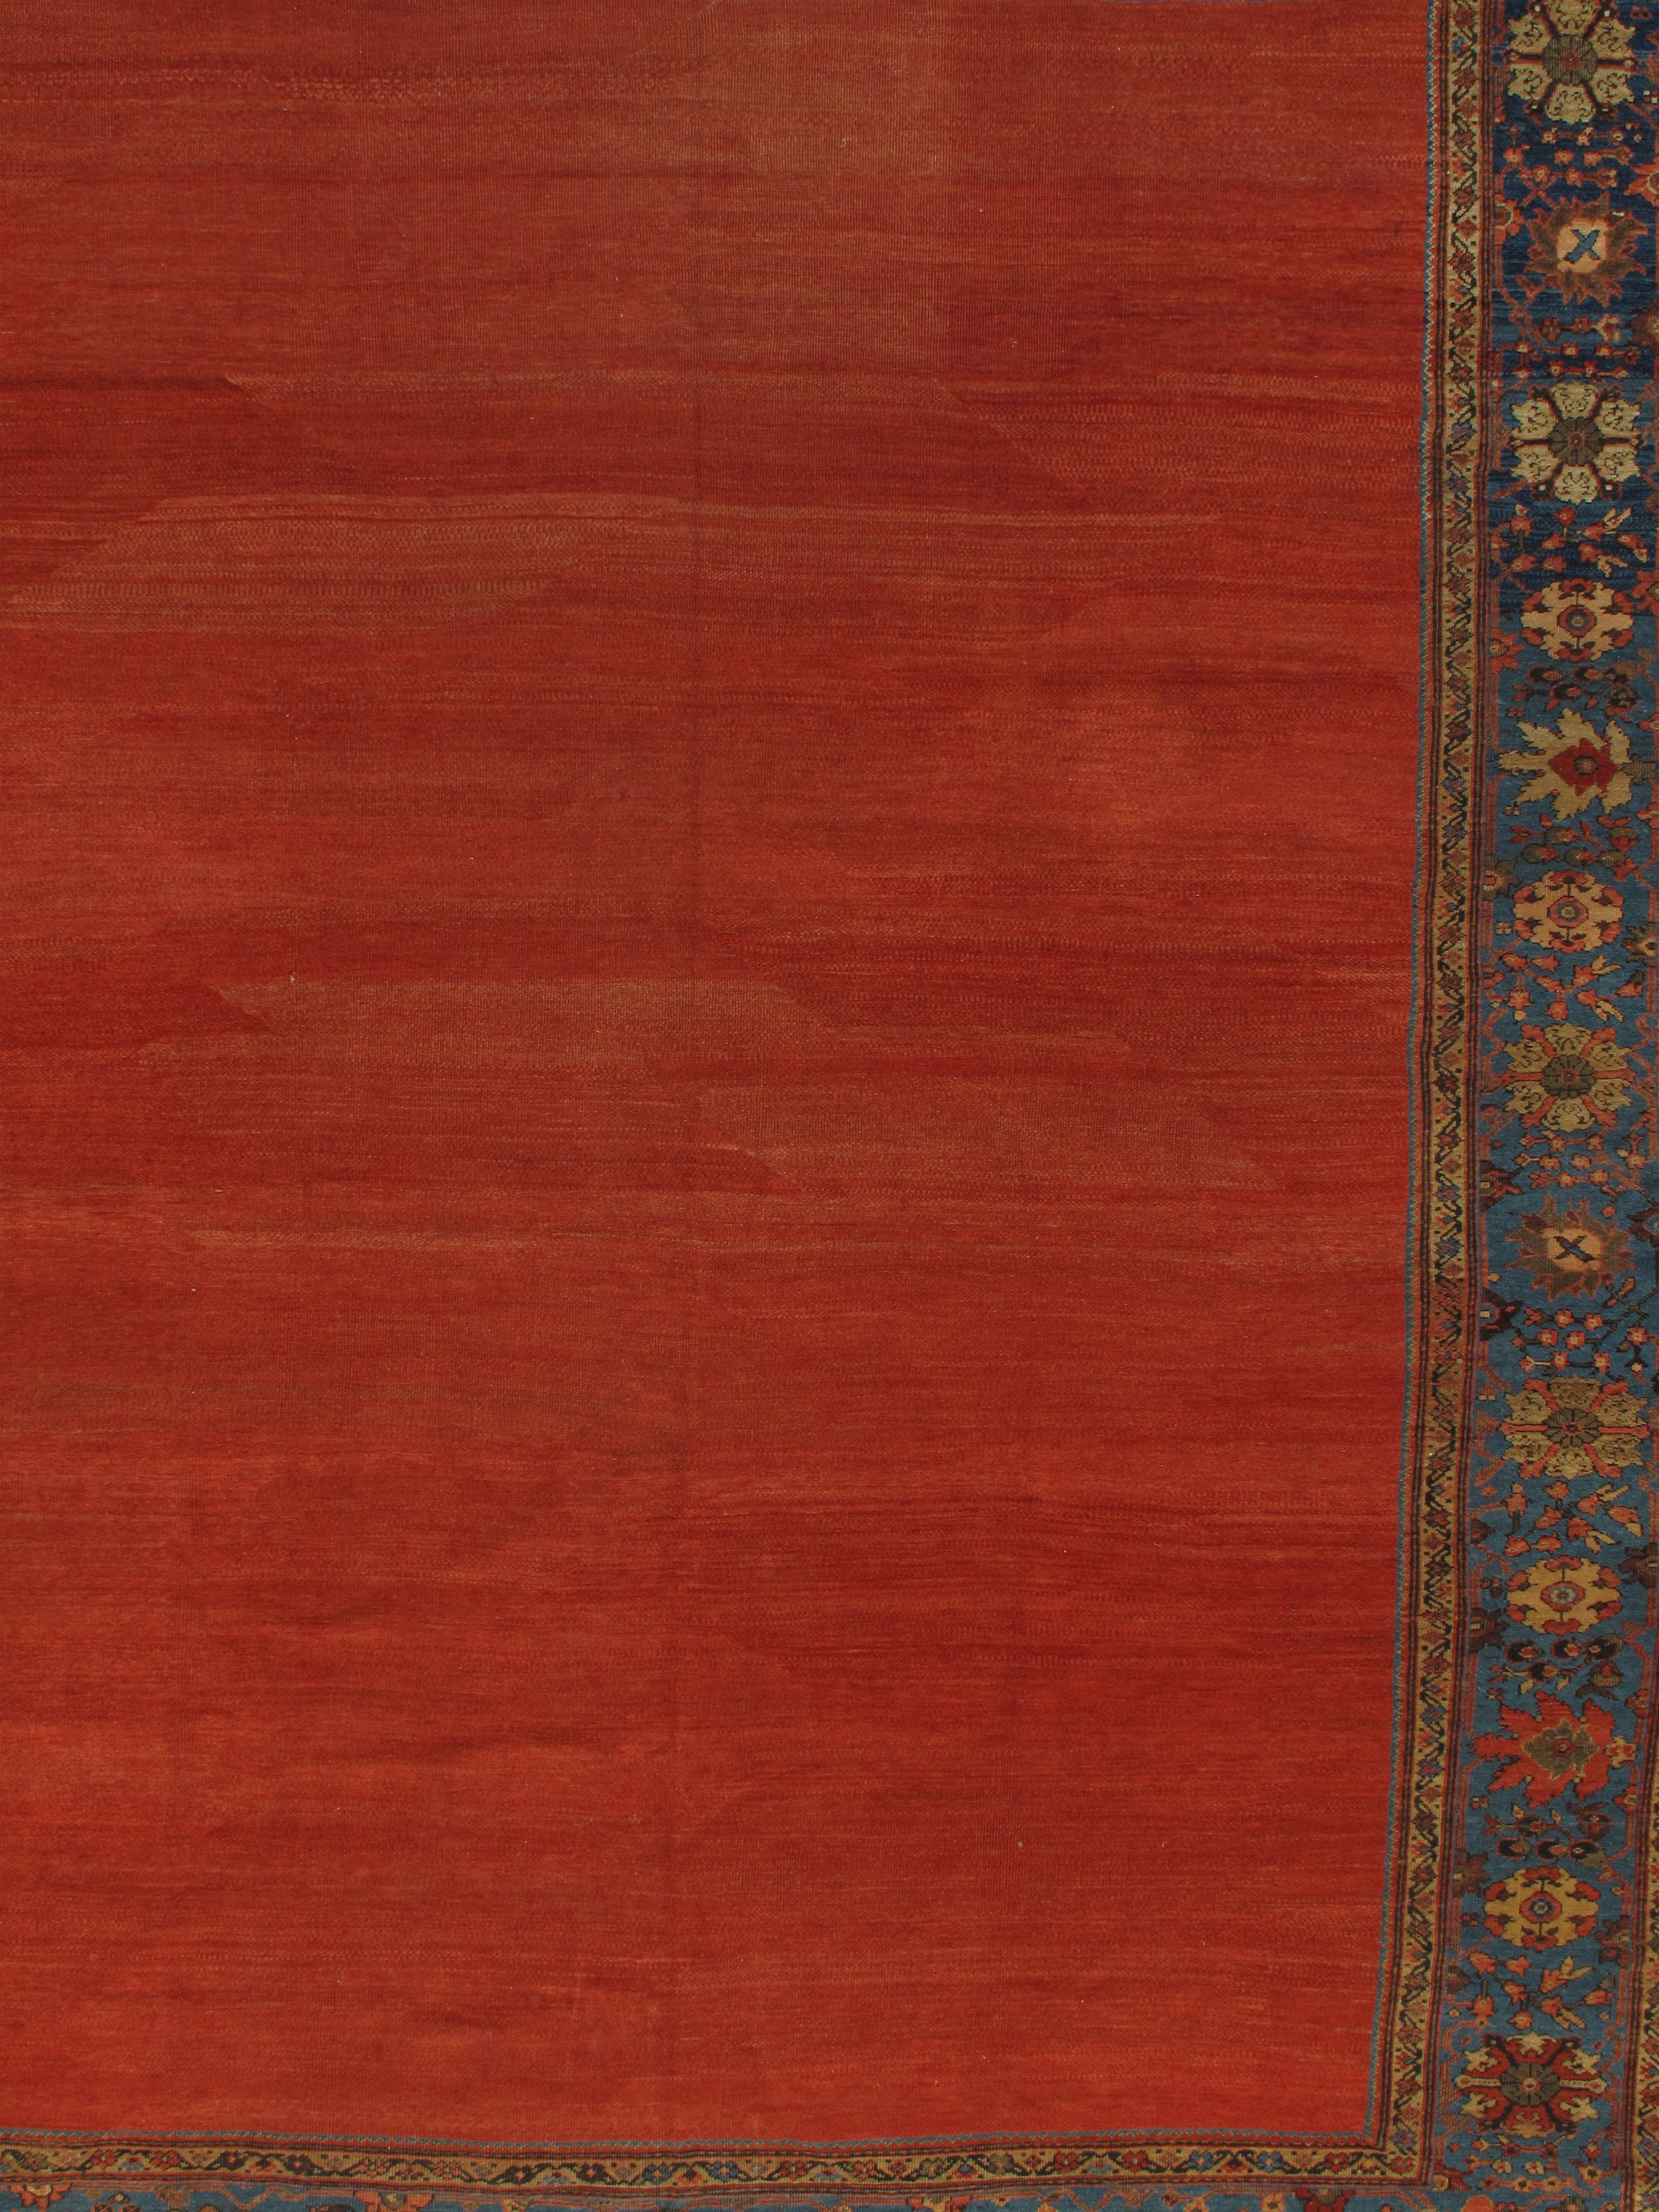 Antique Persian Sultanabad Rug 9'10 x 13'4. This antique Sultanabad has a plain red ground surrounded by a main border in soft blues and filled with wonderful floral motifs, circa 1880. The rug has a natural light and dark side and the pictures